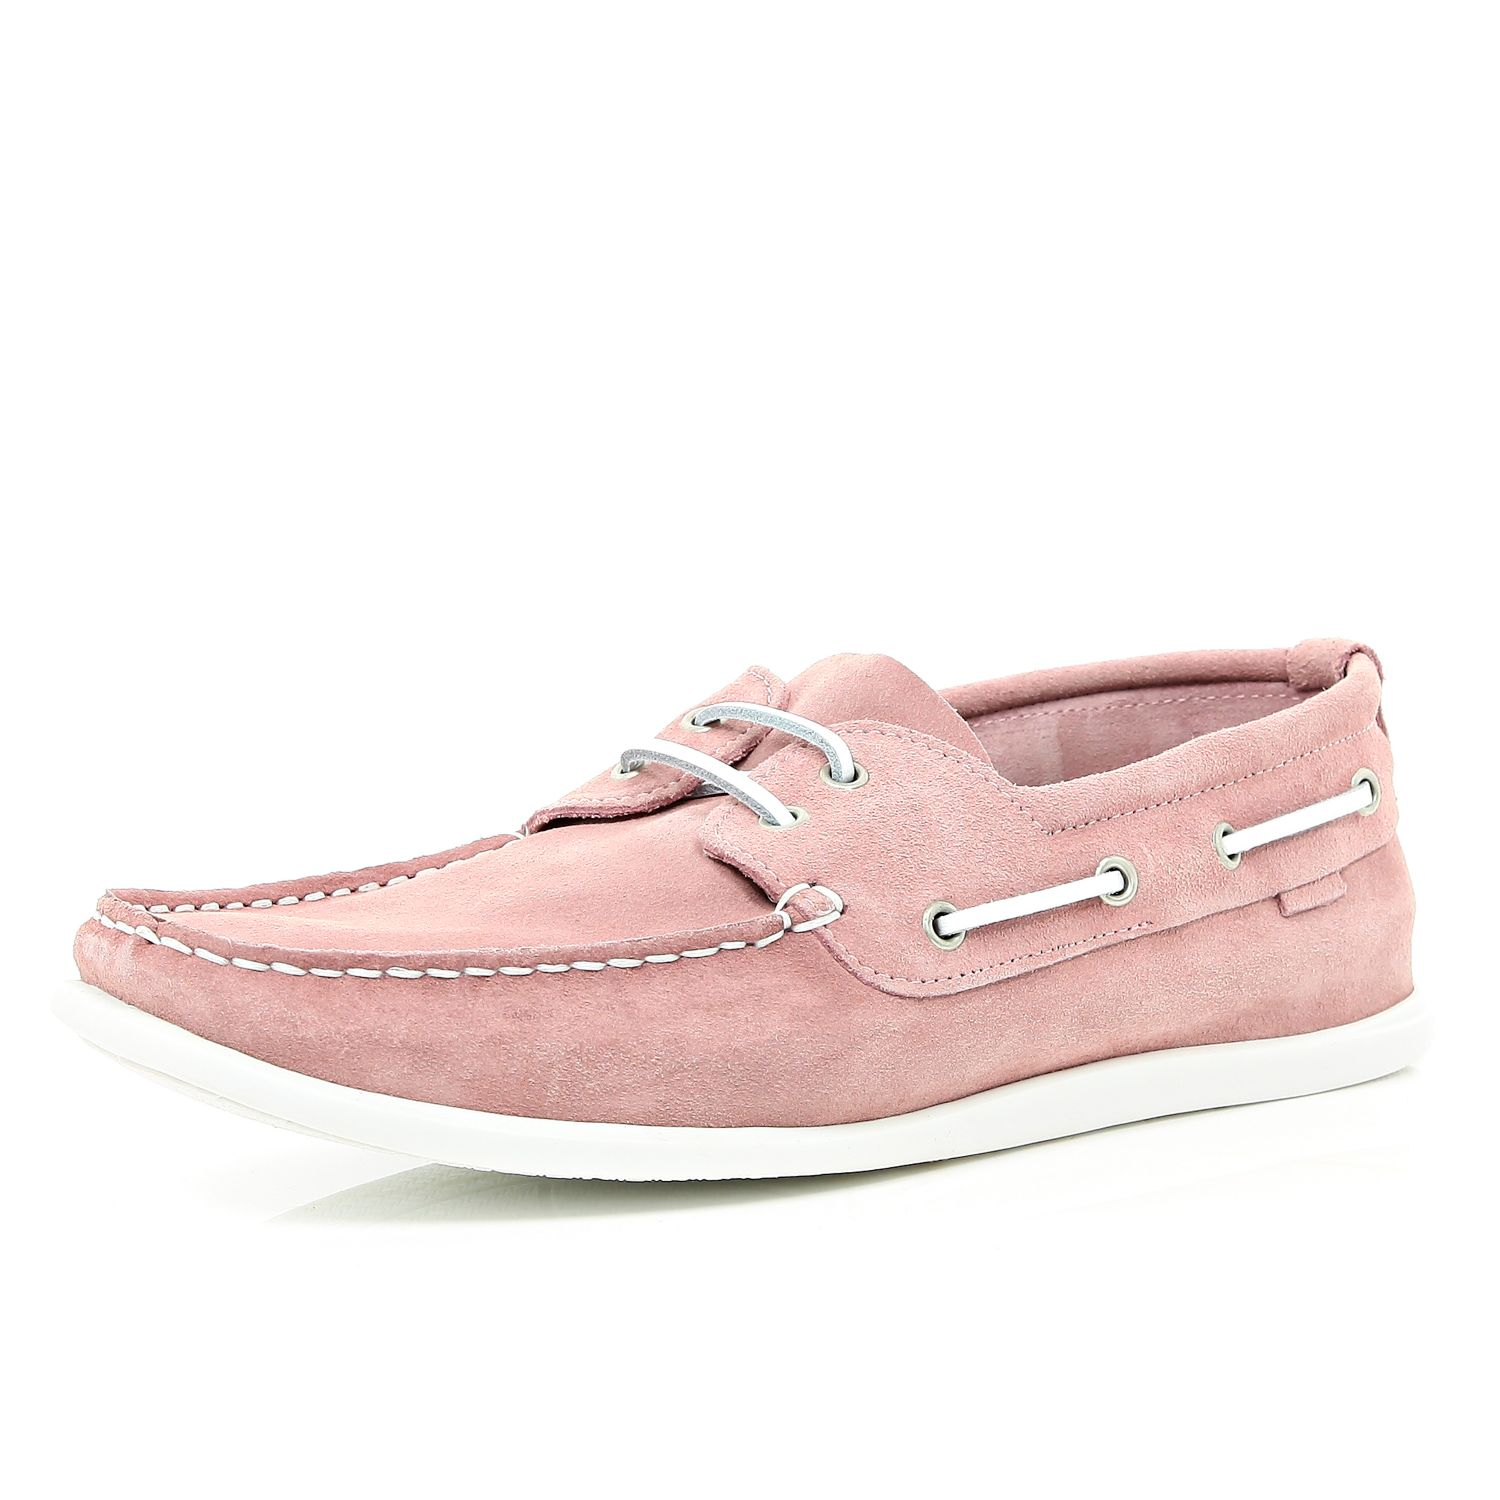 River Island Light Pink Boat Shoes in Pink for Men Lyst